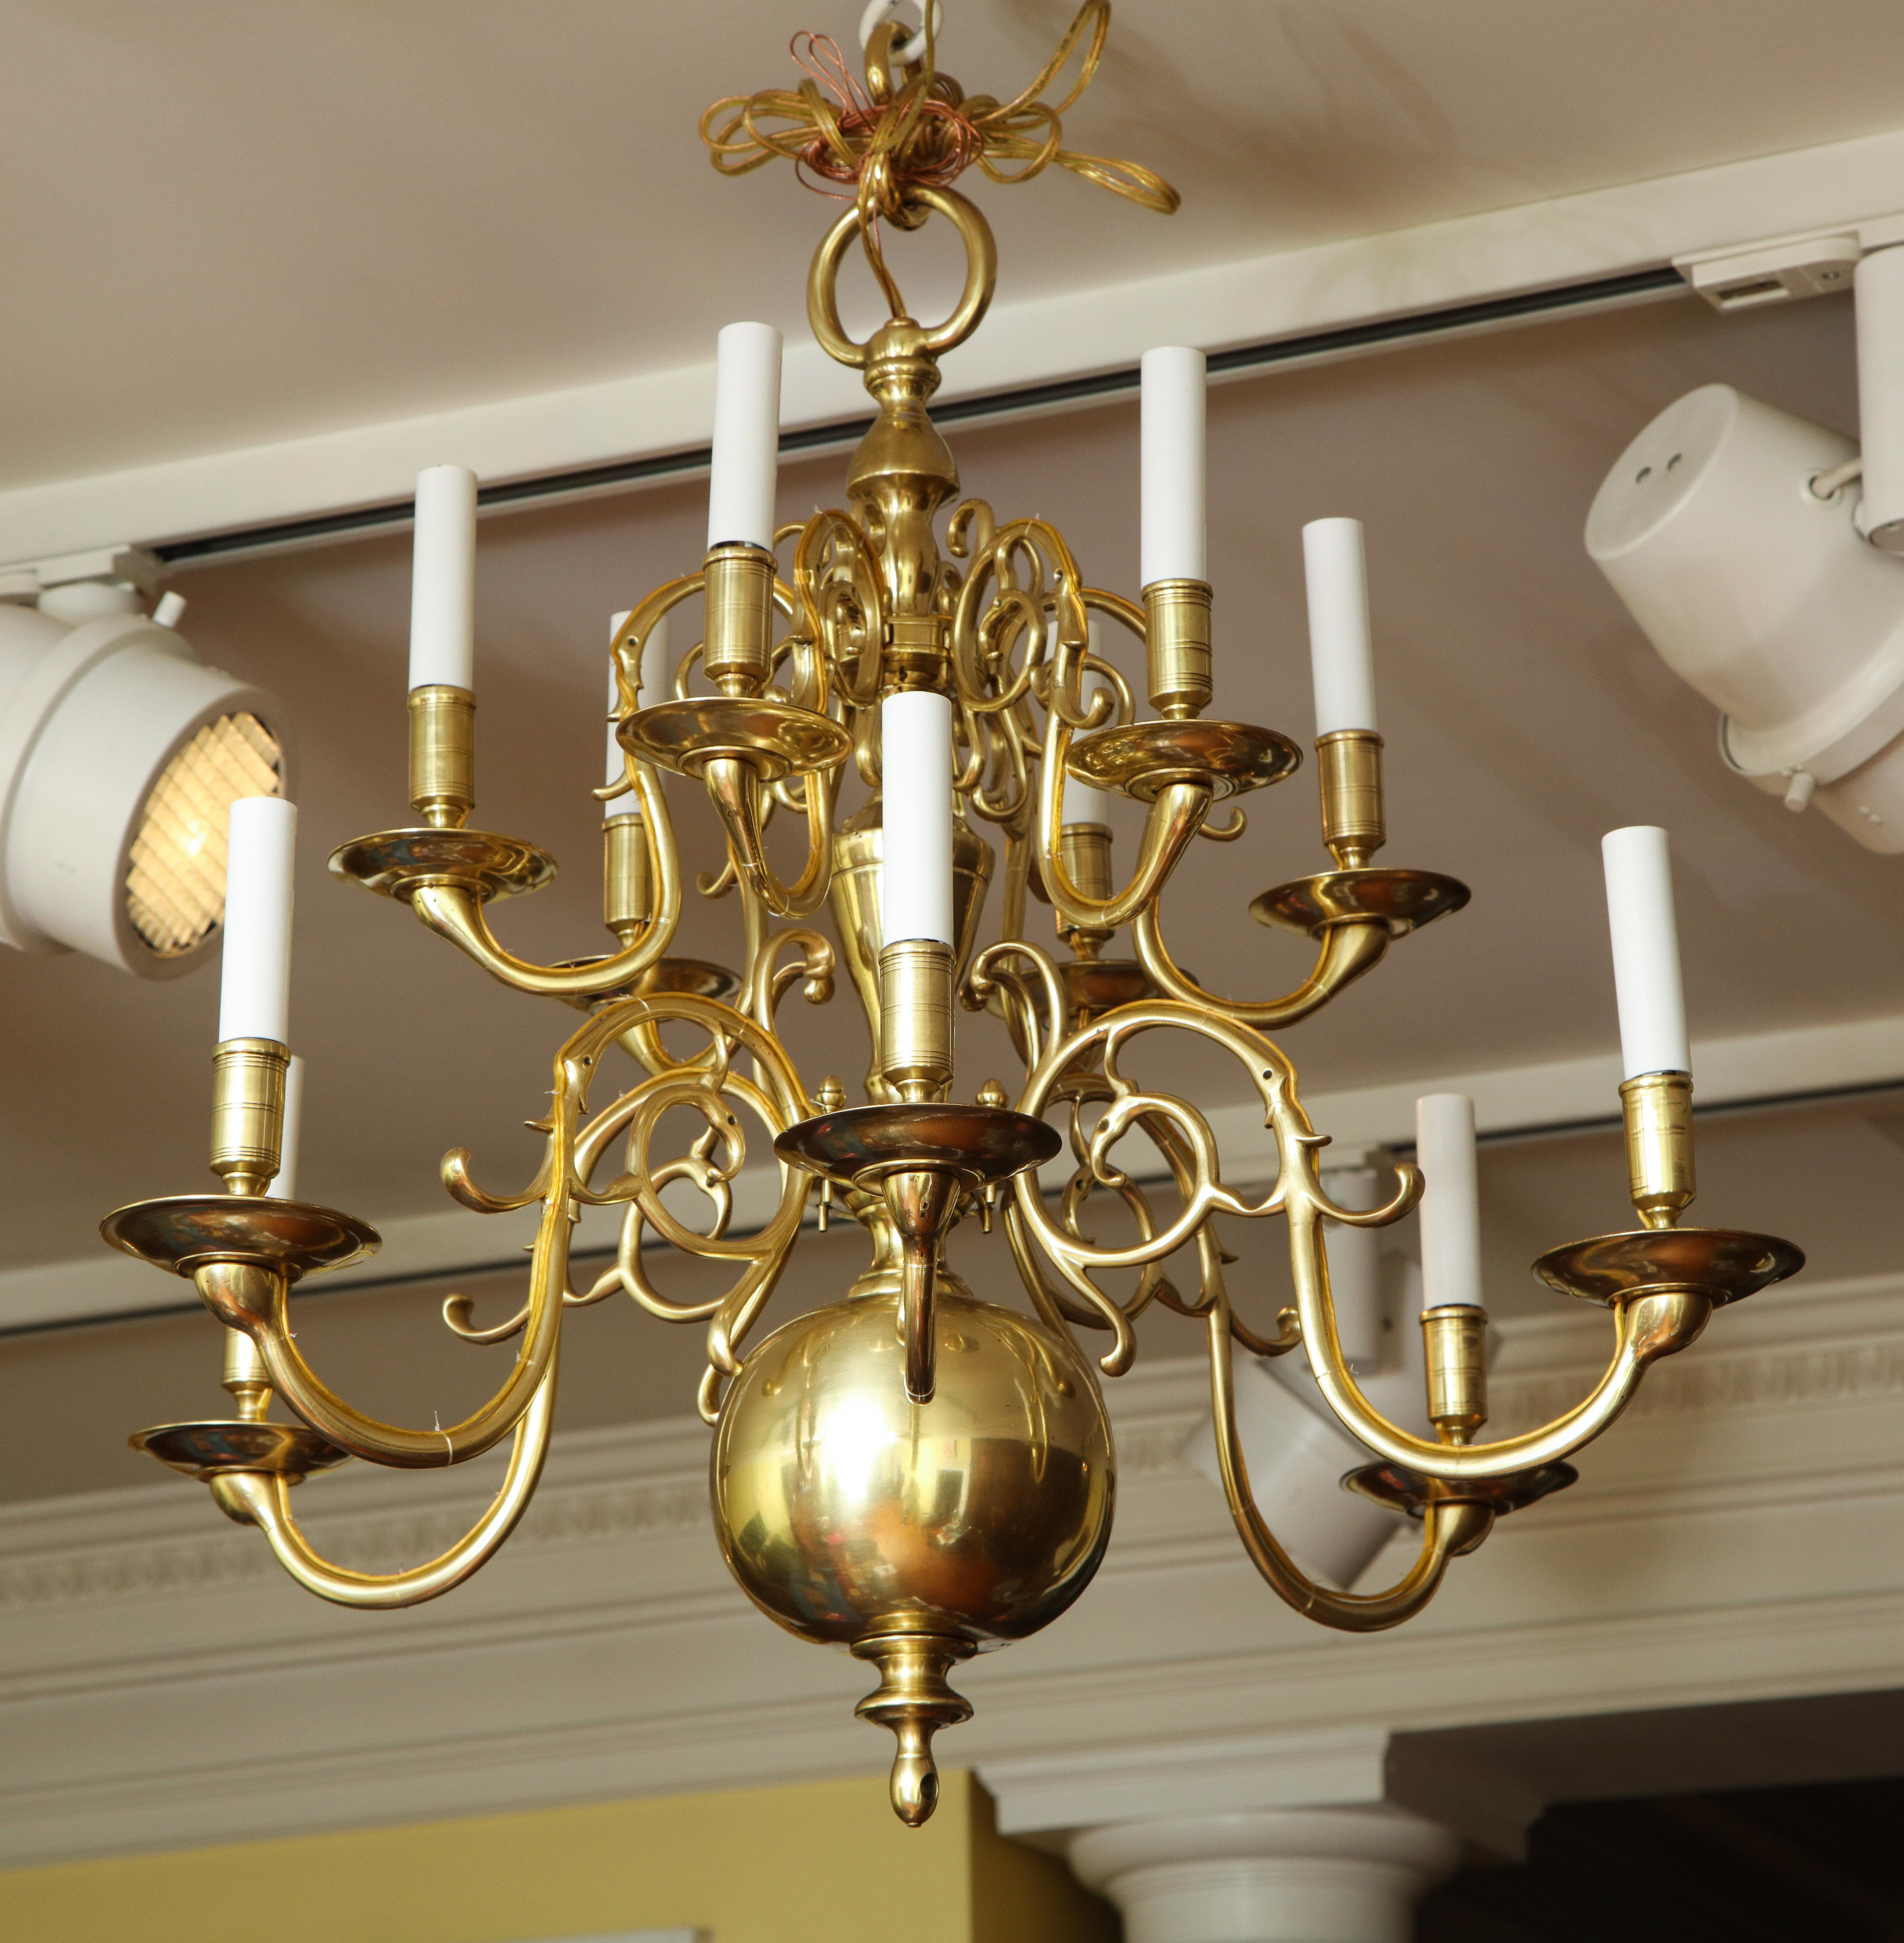 Fine antique brass 12 light chandelier, having two tiers of pierced and scrolling arms ending in plain cups and turned bobeches, having a turned sectioned shaft with a large lower ball and turned finial with brass ring. European mid-19th